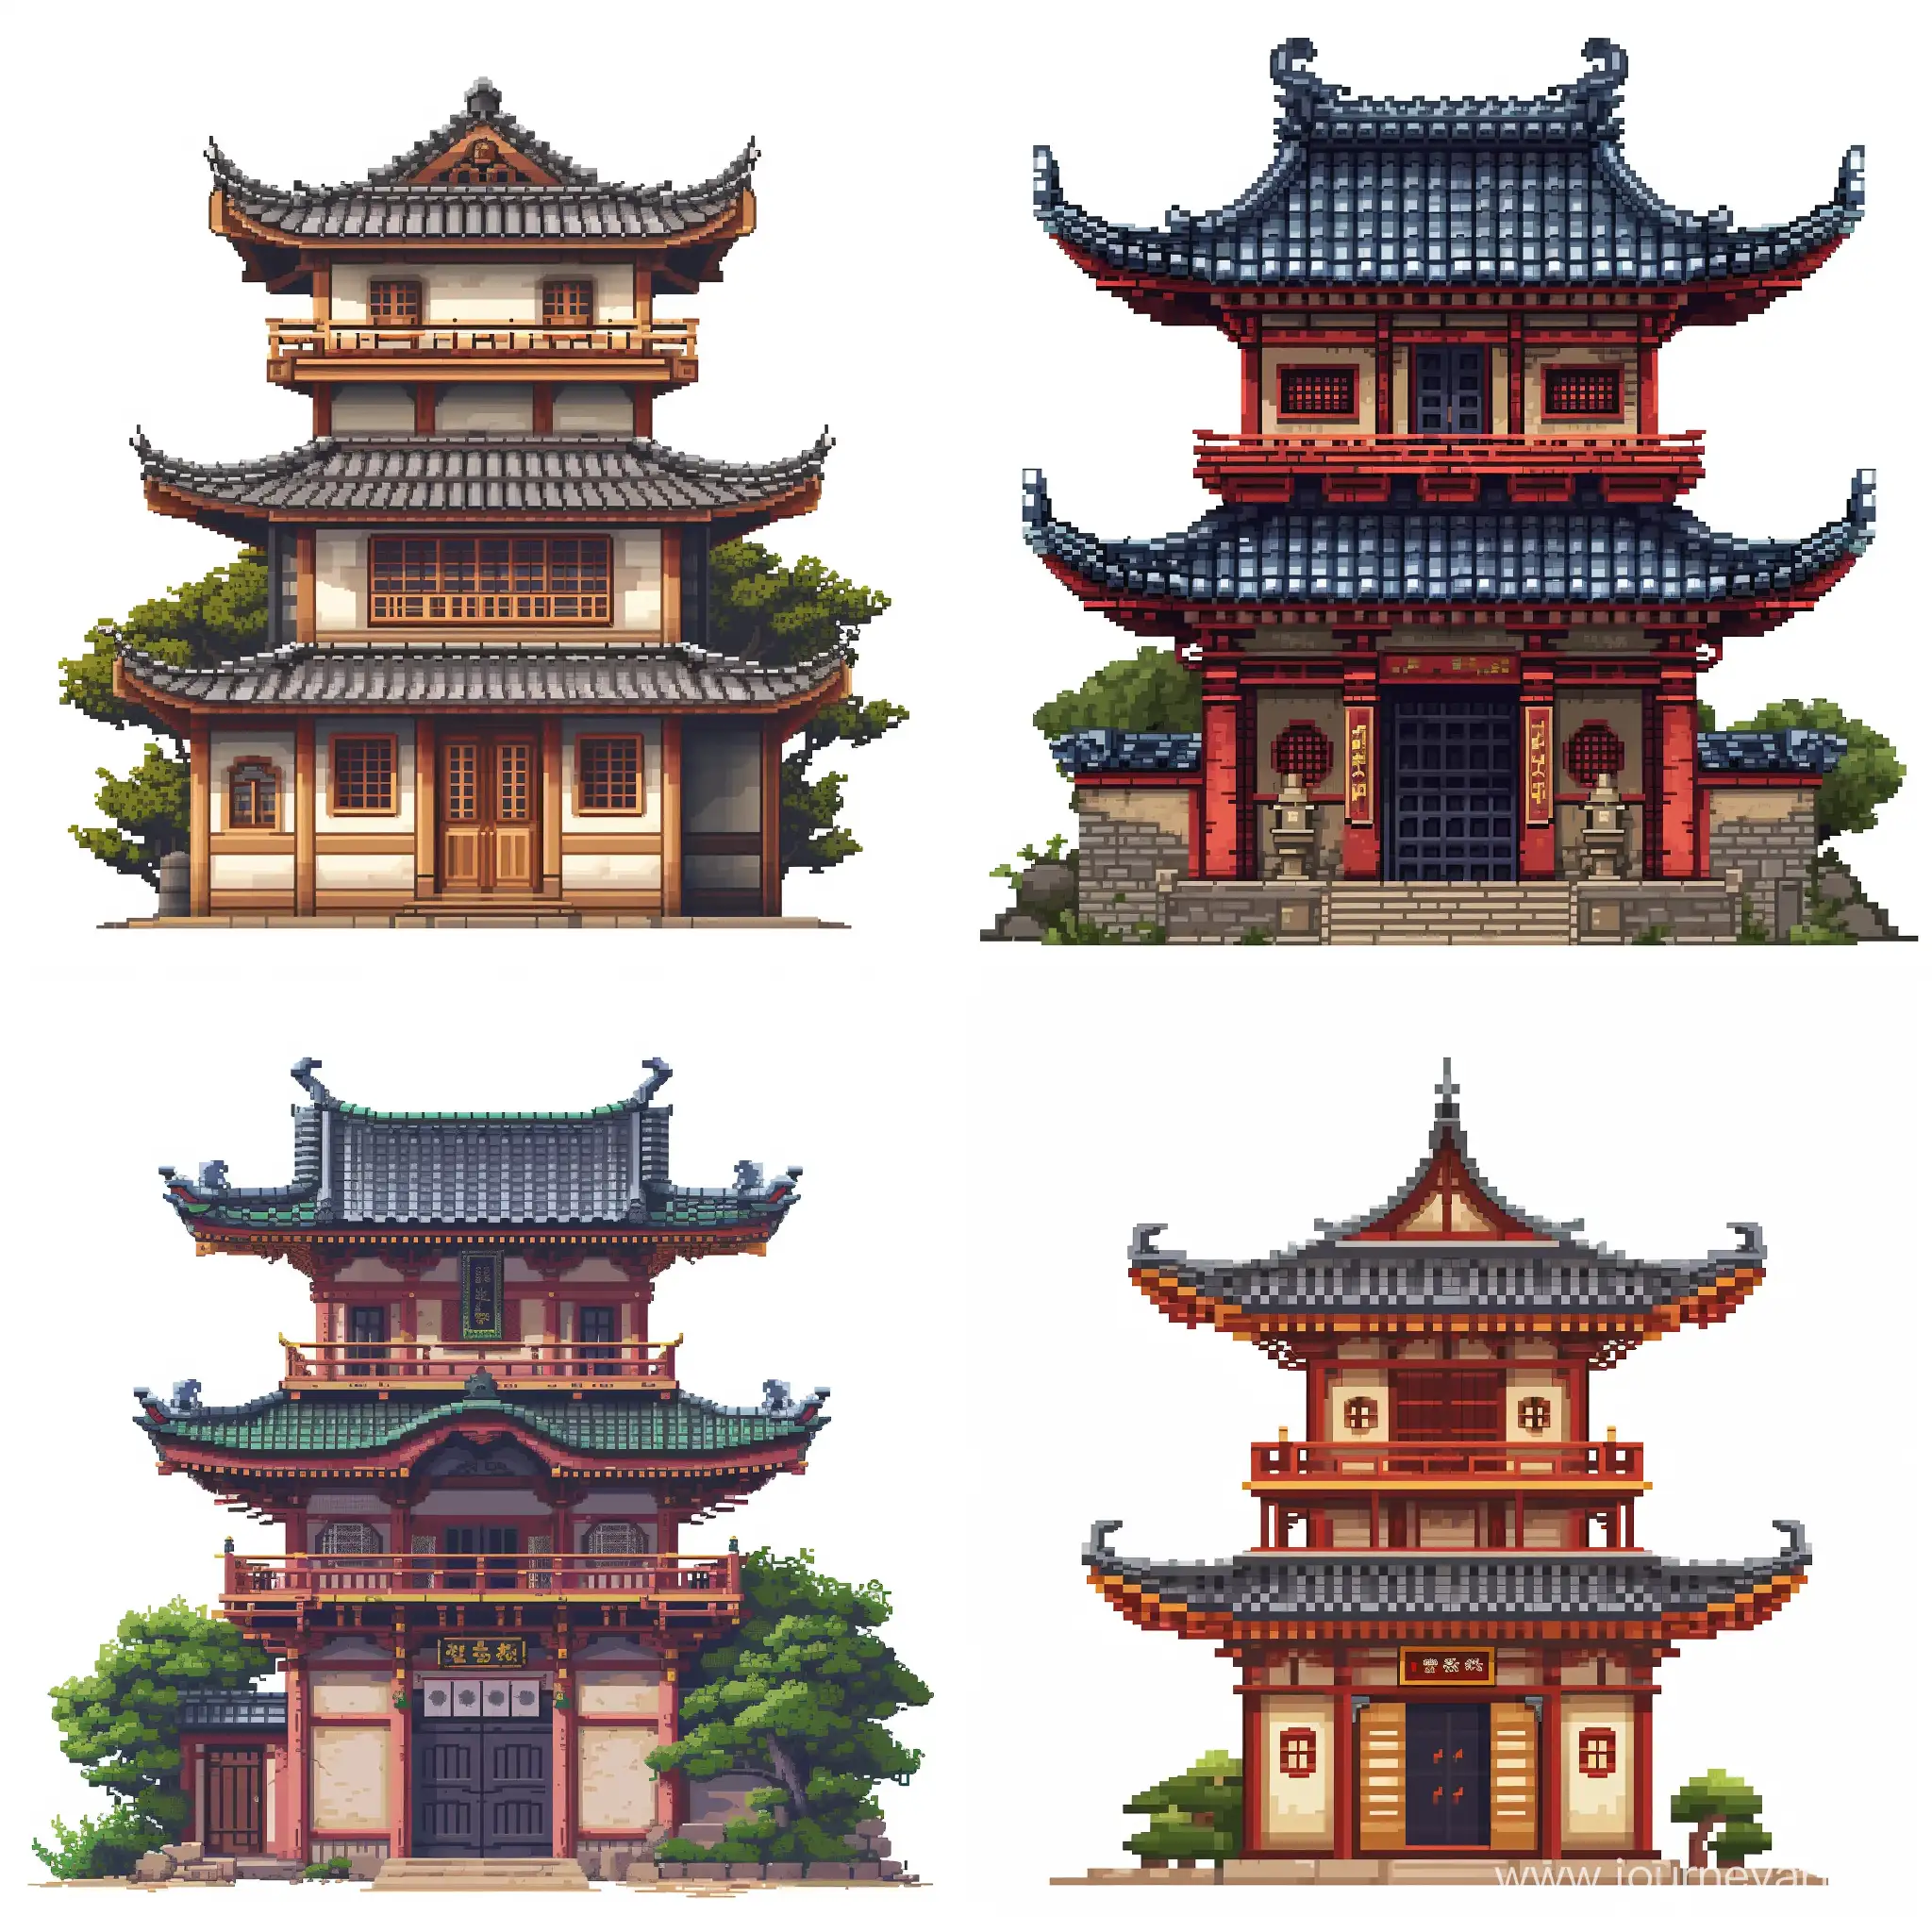 Pixel-Art-Representation-of-Traditional-Japanese-Architecture-on-White-Background